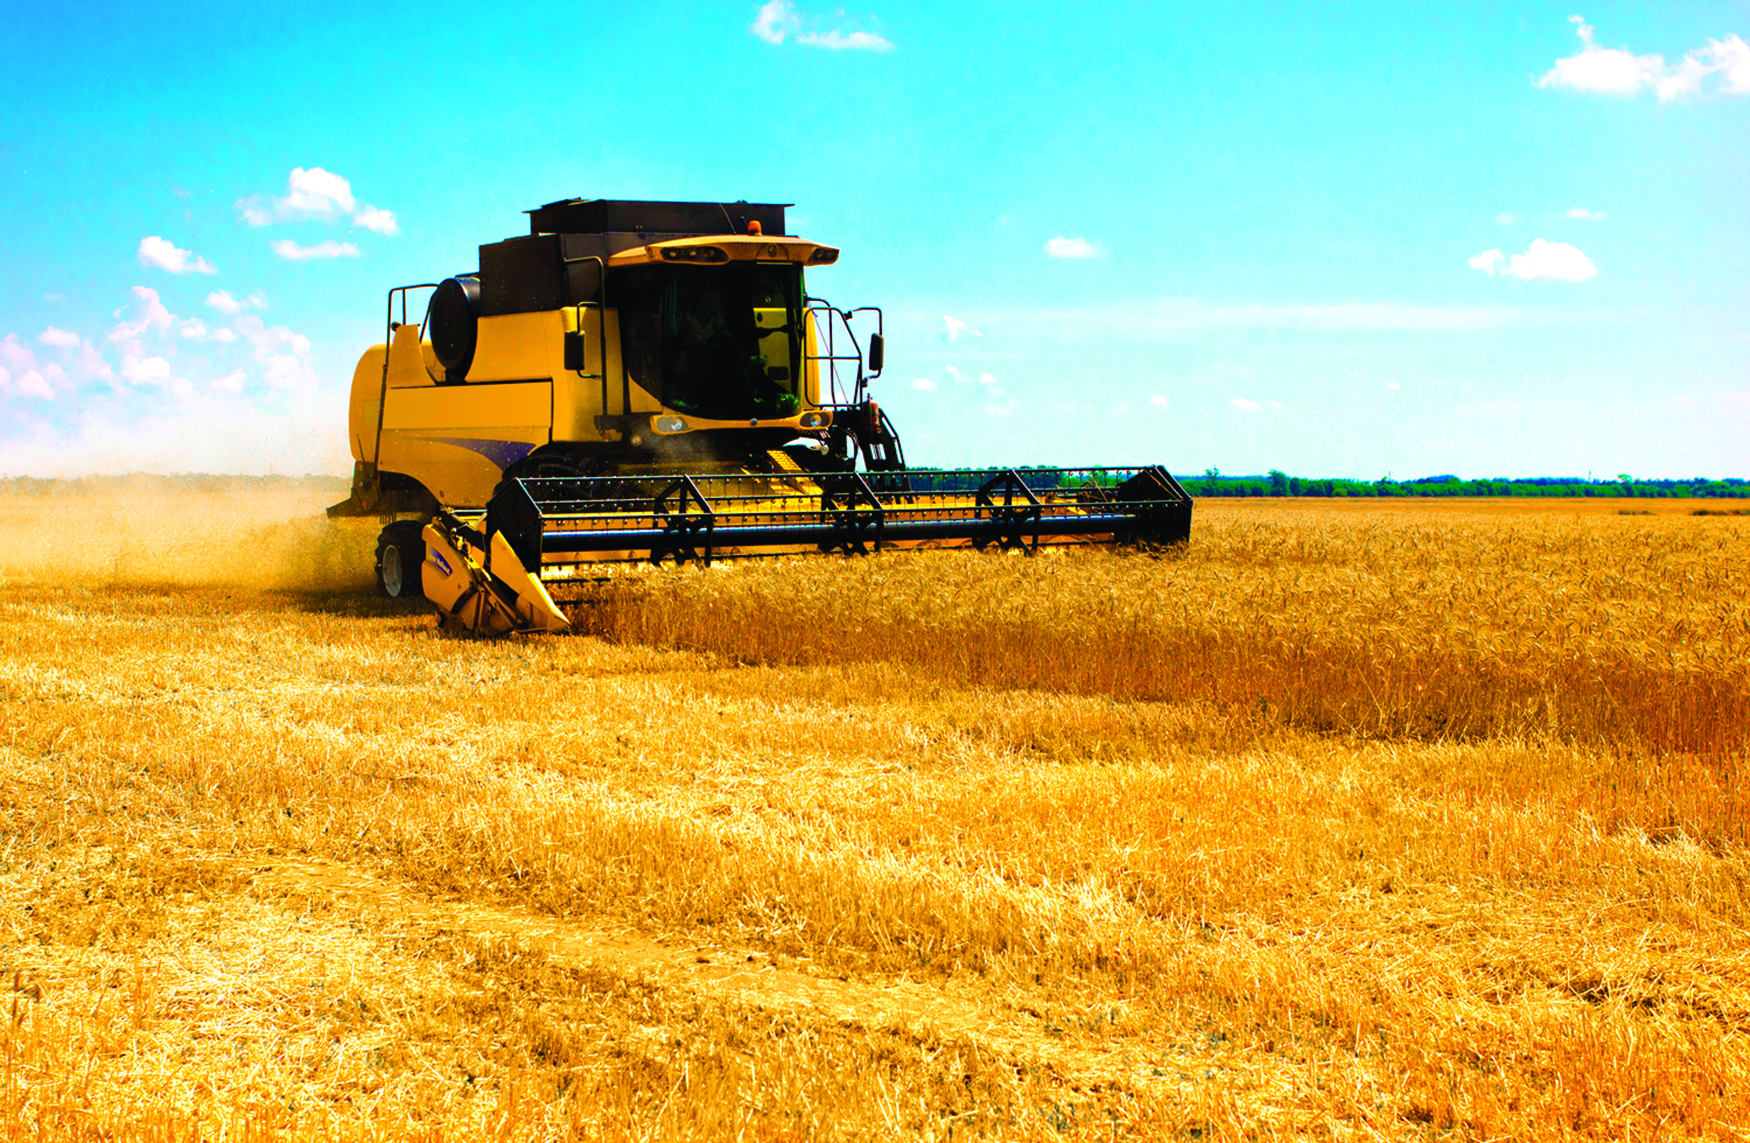 An image of a combine harvester working in a field.